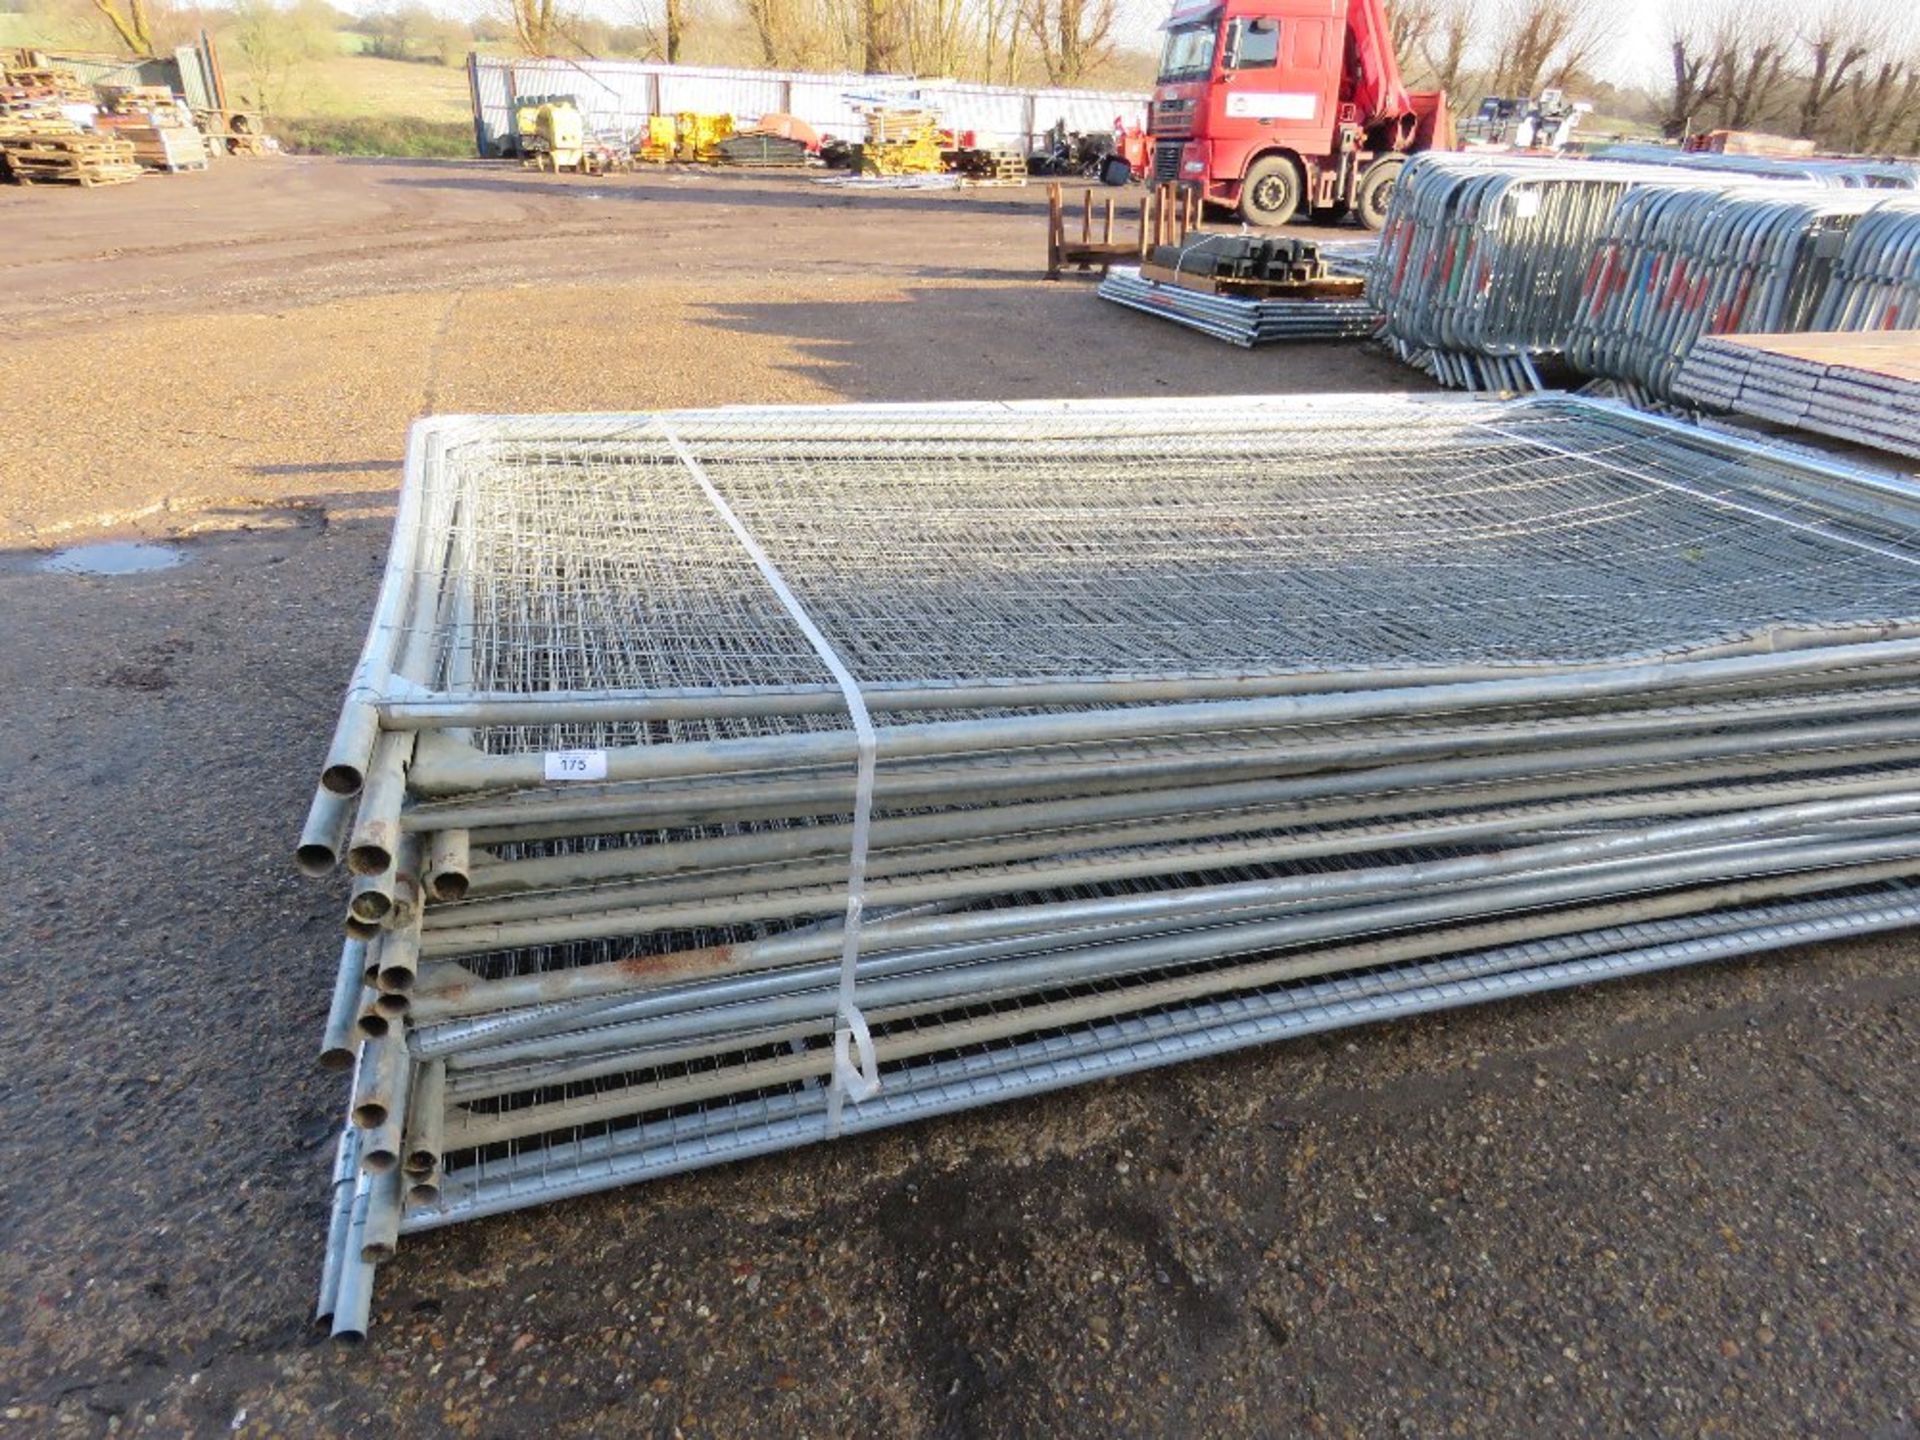 20 X HERAS TYPE TEMPORARY SITE PANELS This items is being item sold under AMS…no vat will be on - Image 2 of 3